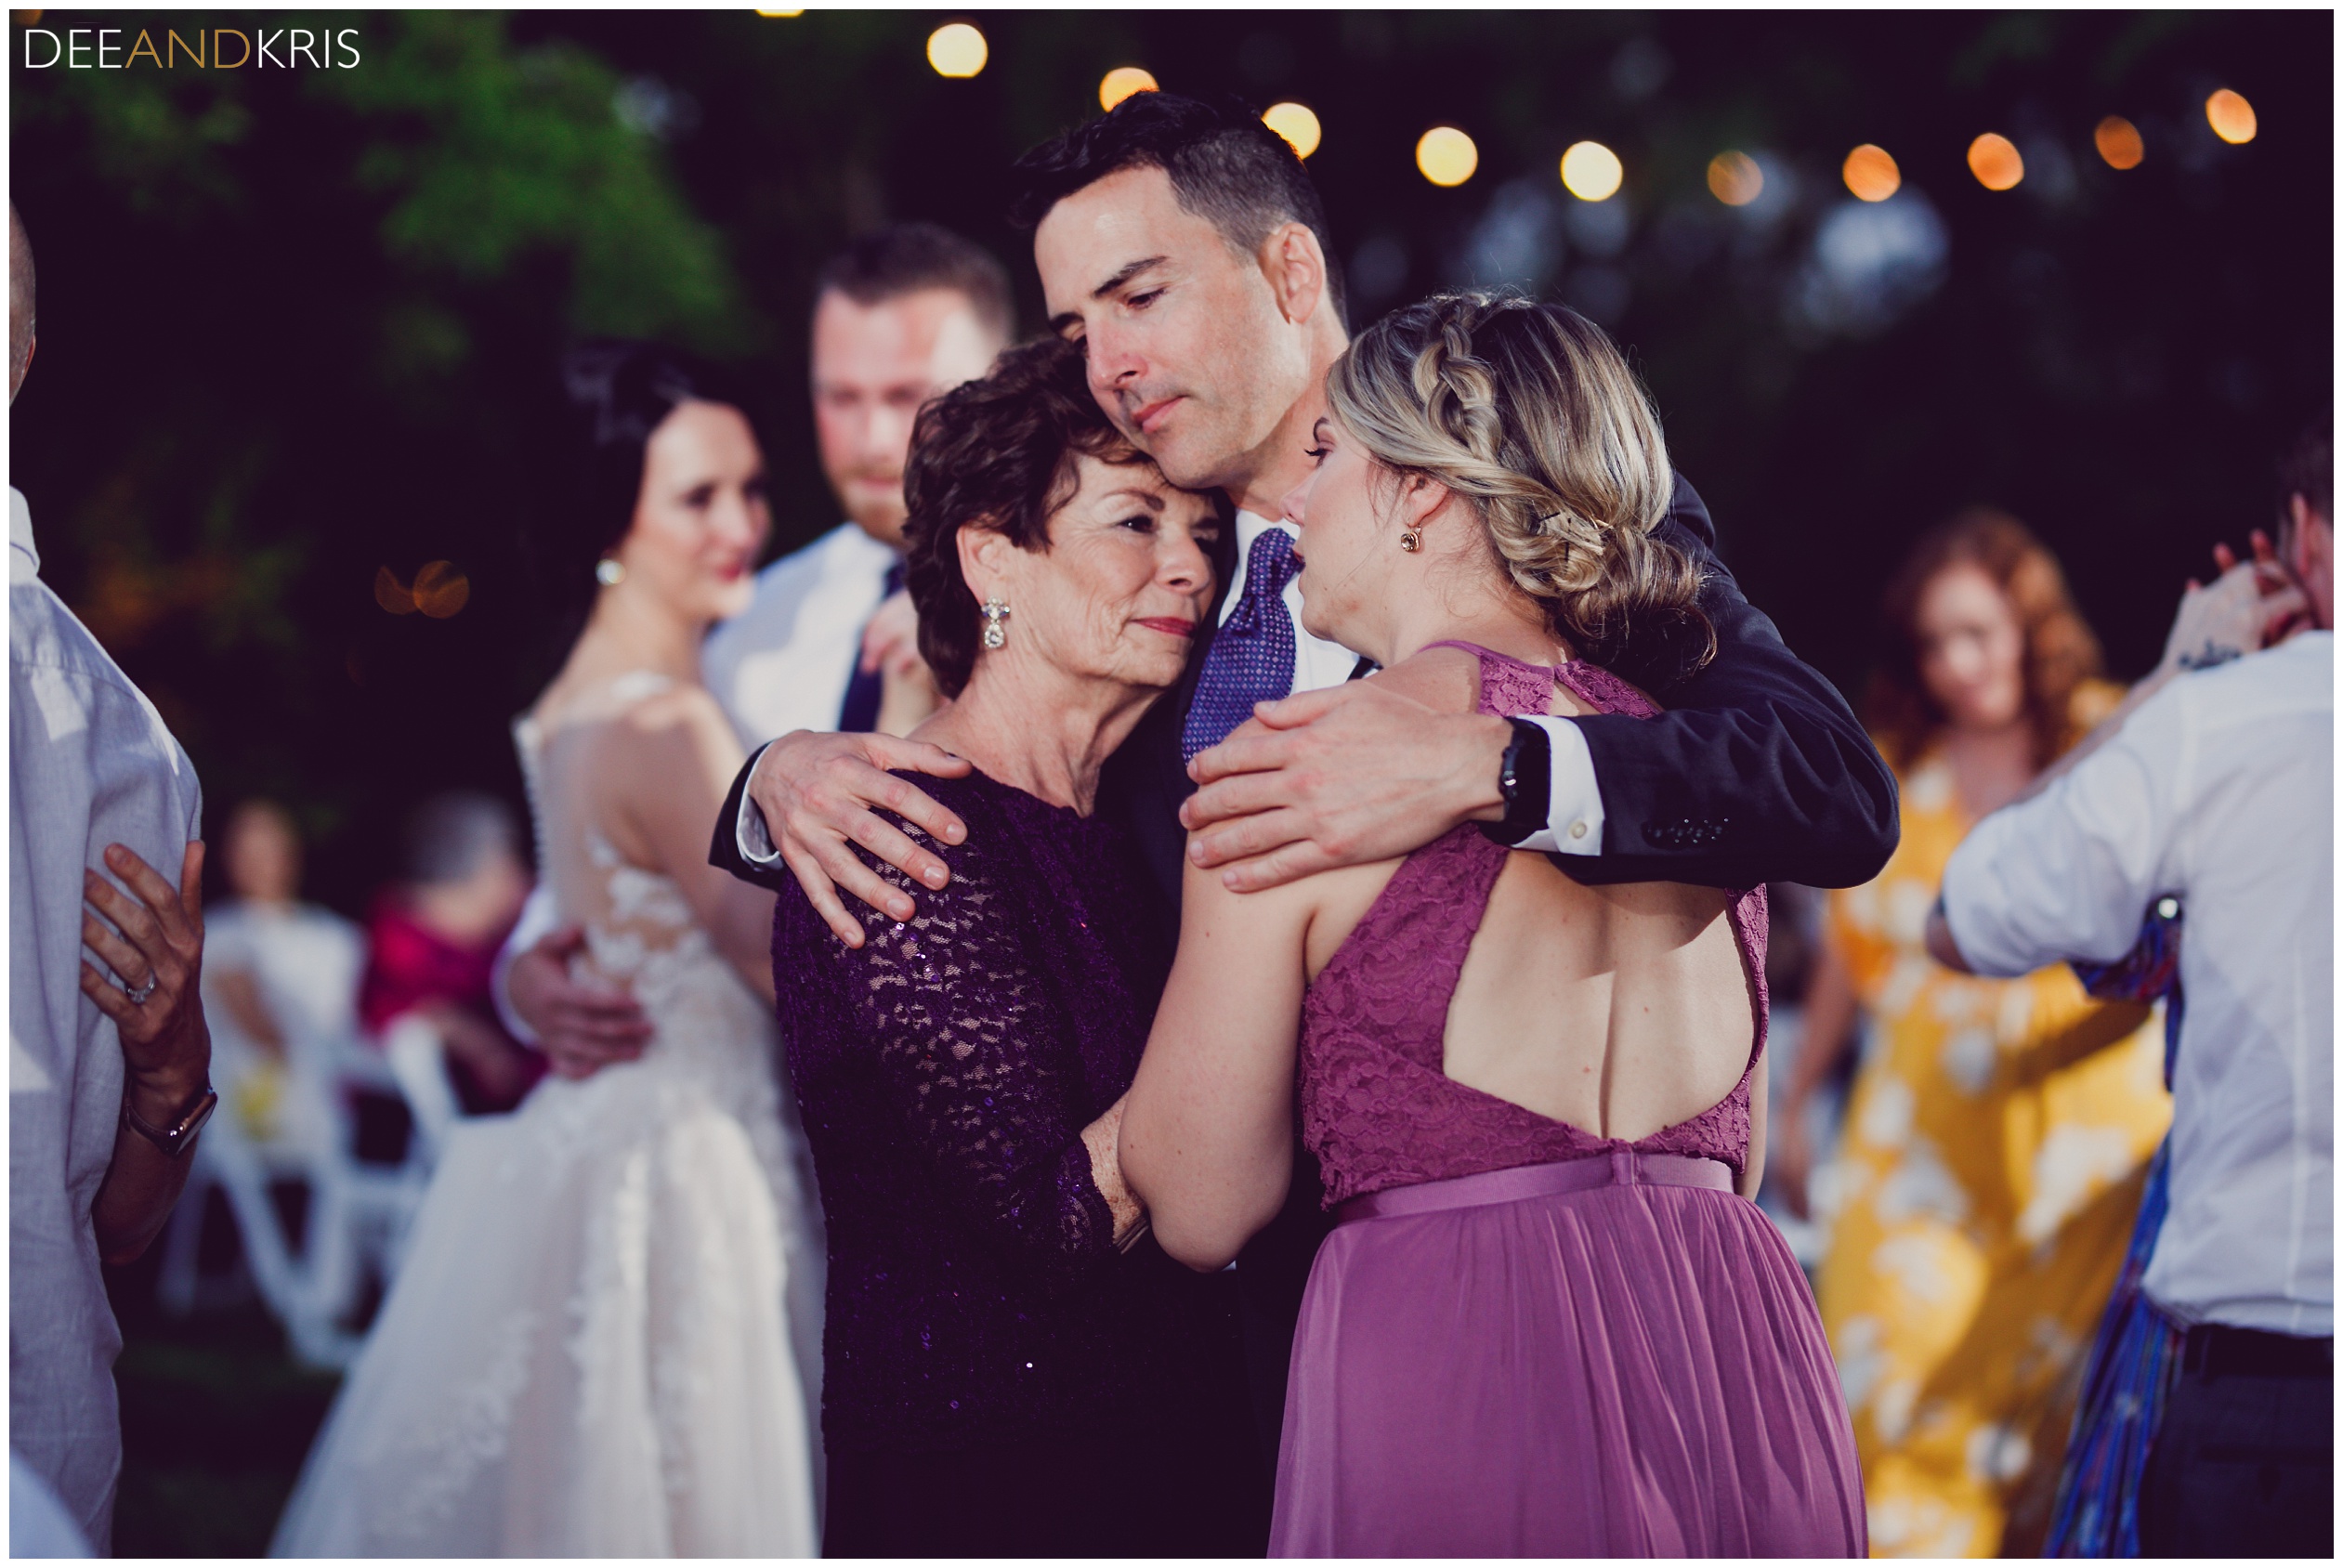 Son and Mother Dance Sacramento Wedding, Design with Florae, Heritage Dining & Provisions, Freeport Bakery, Mr DJ Event Services,  Fab Forties Wedding, detail shot, Heritage Dining & Provisions, Sacramento Wedding photographers, Dee and Kris Photography, Bride and Bridemaids 